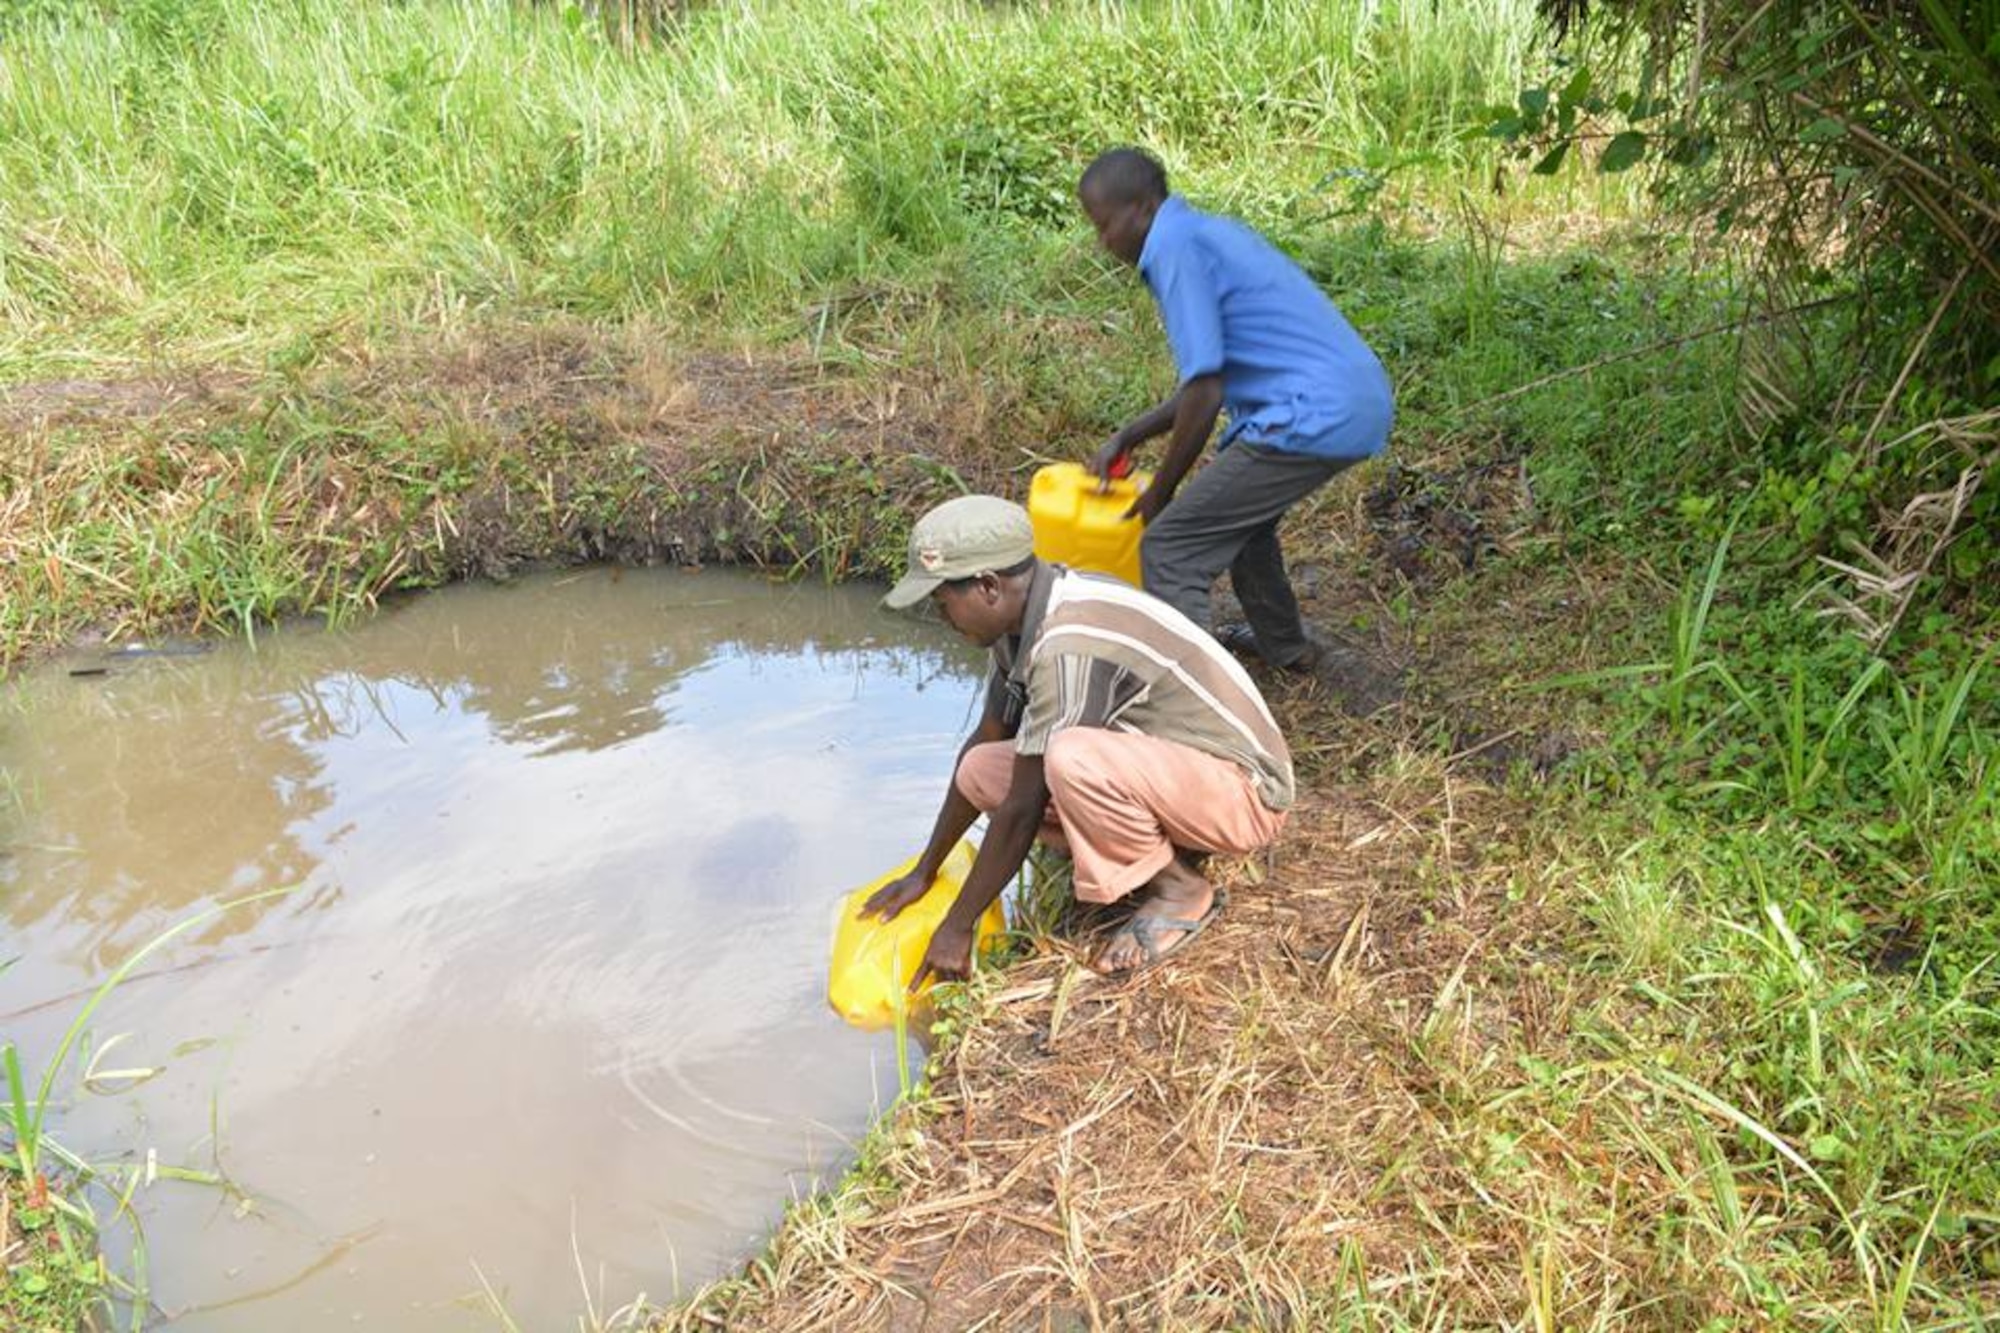 Villagers collect water from a local pond. The water, used for houshold needs such as drinking and cooking, contains bacteria that causes those who consume it to become ill. (Courtesy photo)